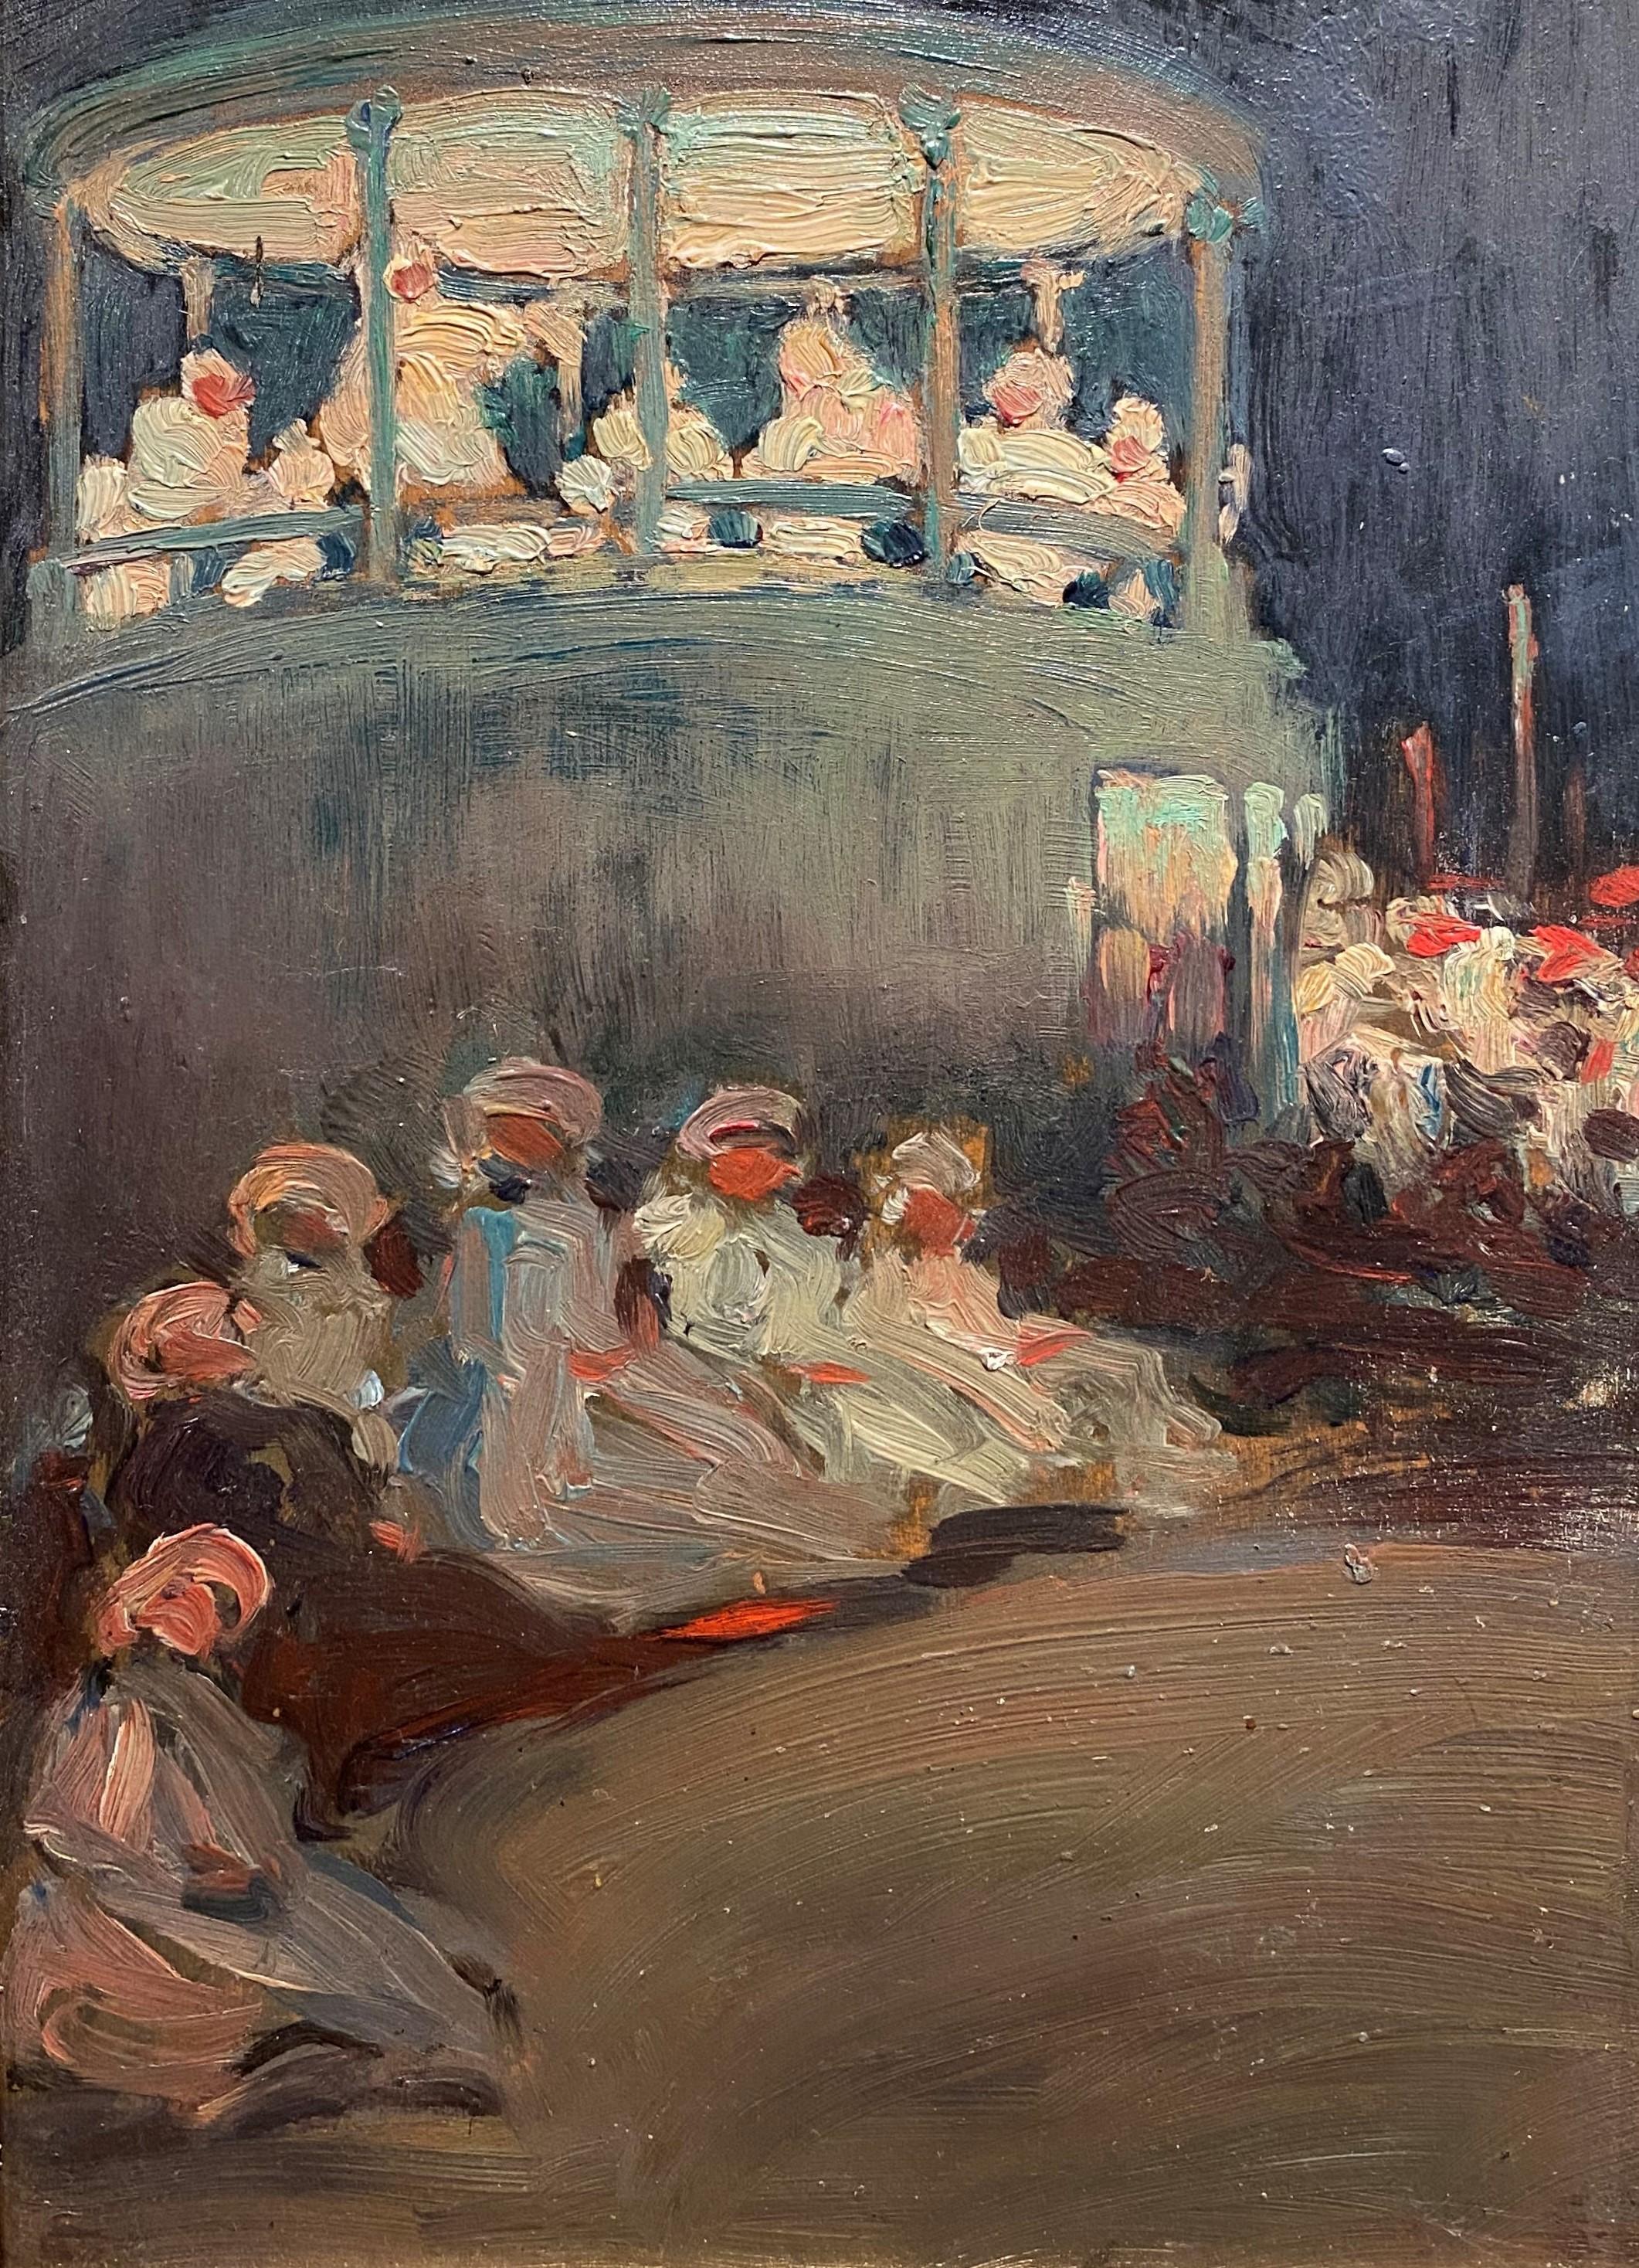 Band Concert - Painting by Walter Farndon